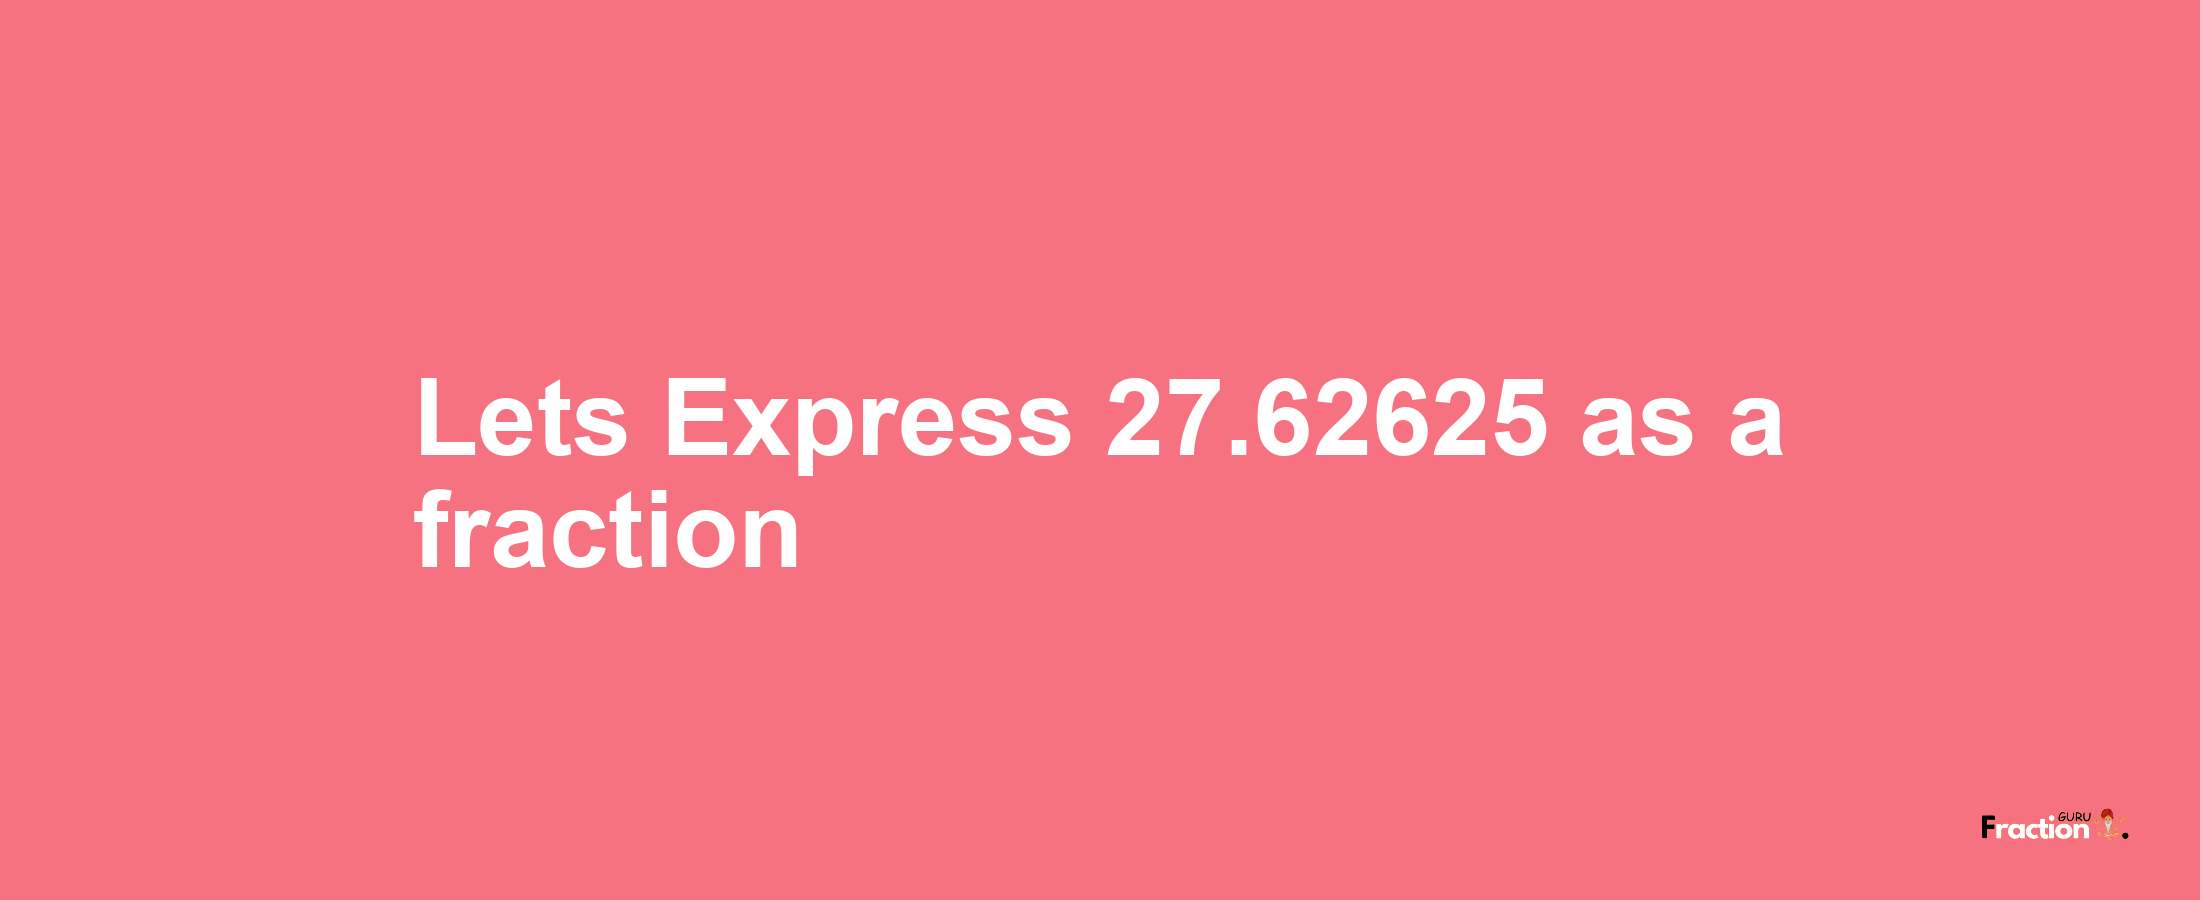 Lets Express 27.62625 as afraction